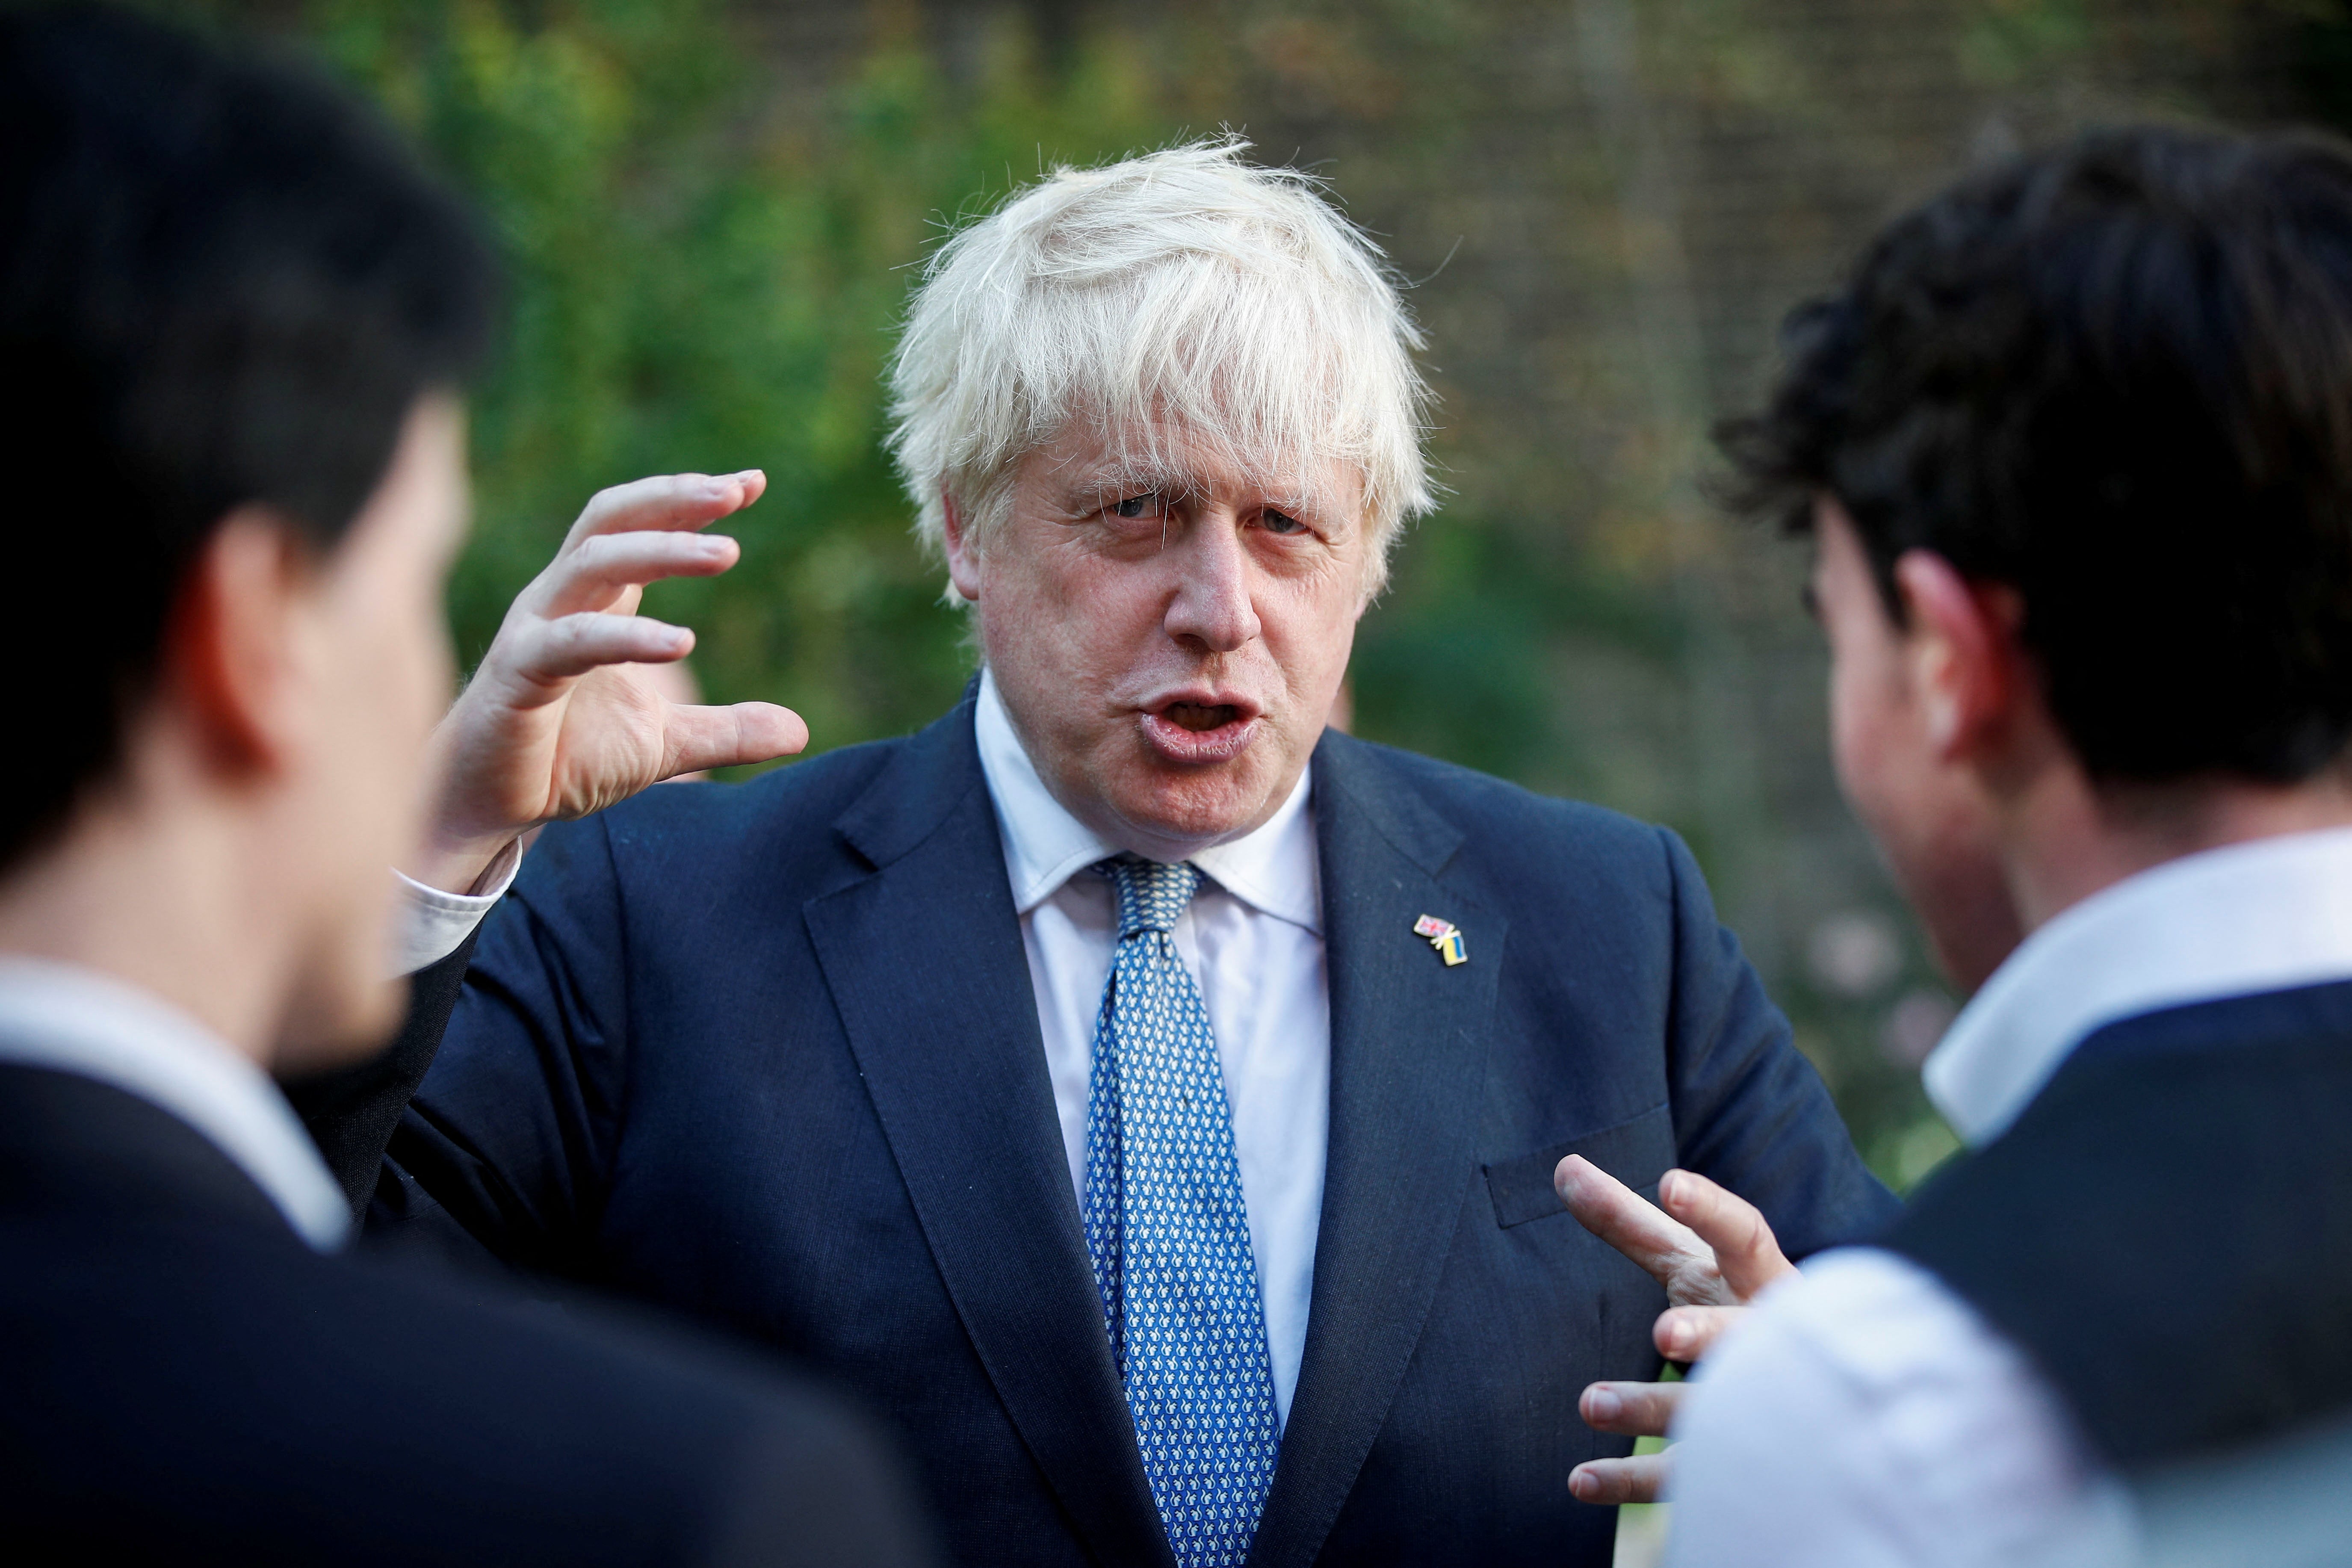 Prime Minister Boris Johnson has said that he expects his replacement to offer new measures to support struggling households (Peter Nicholls/PA)